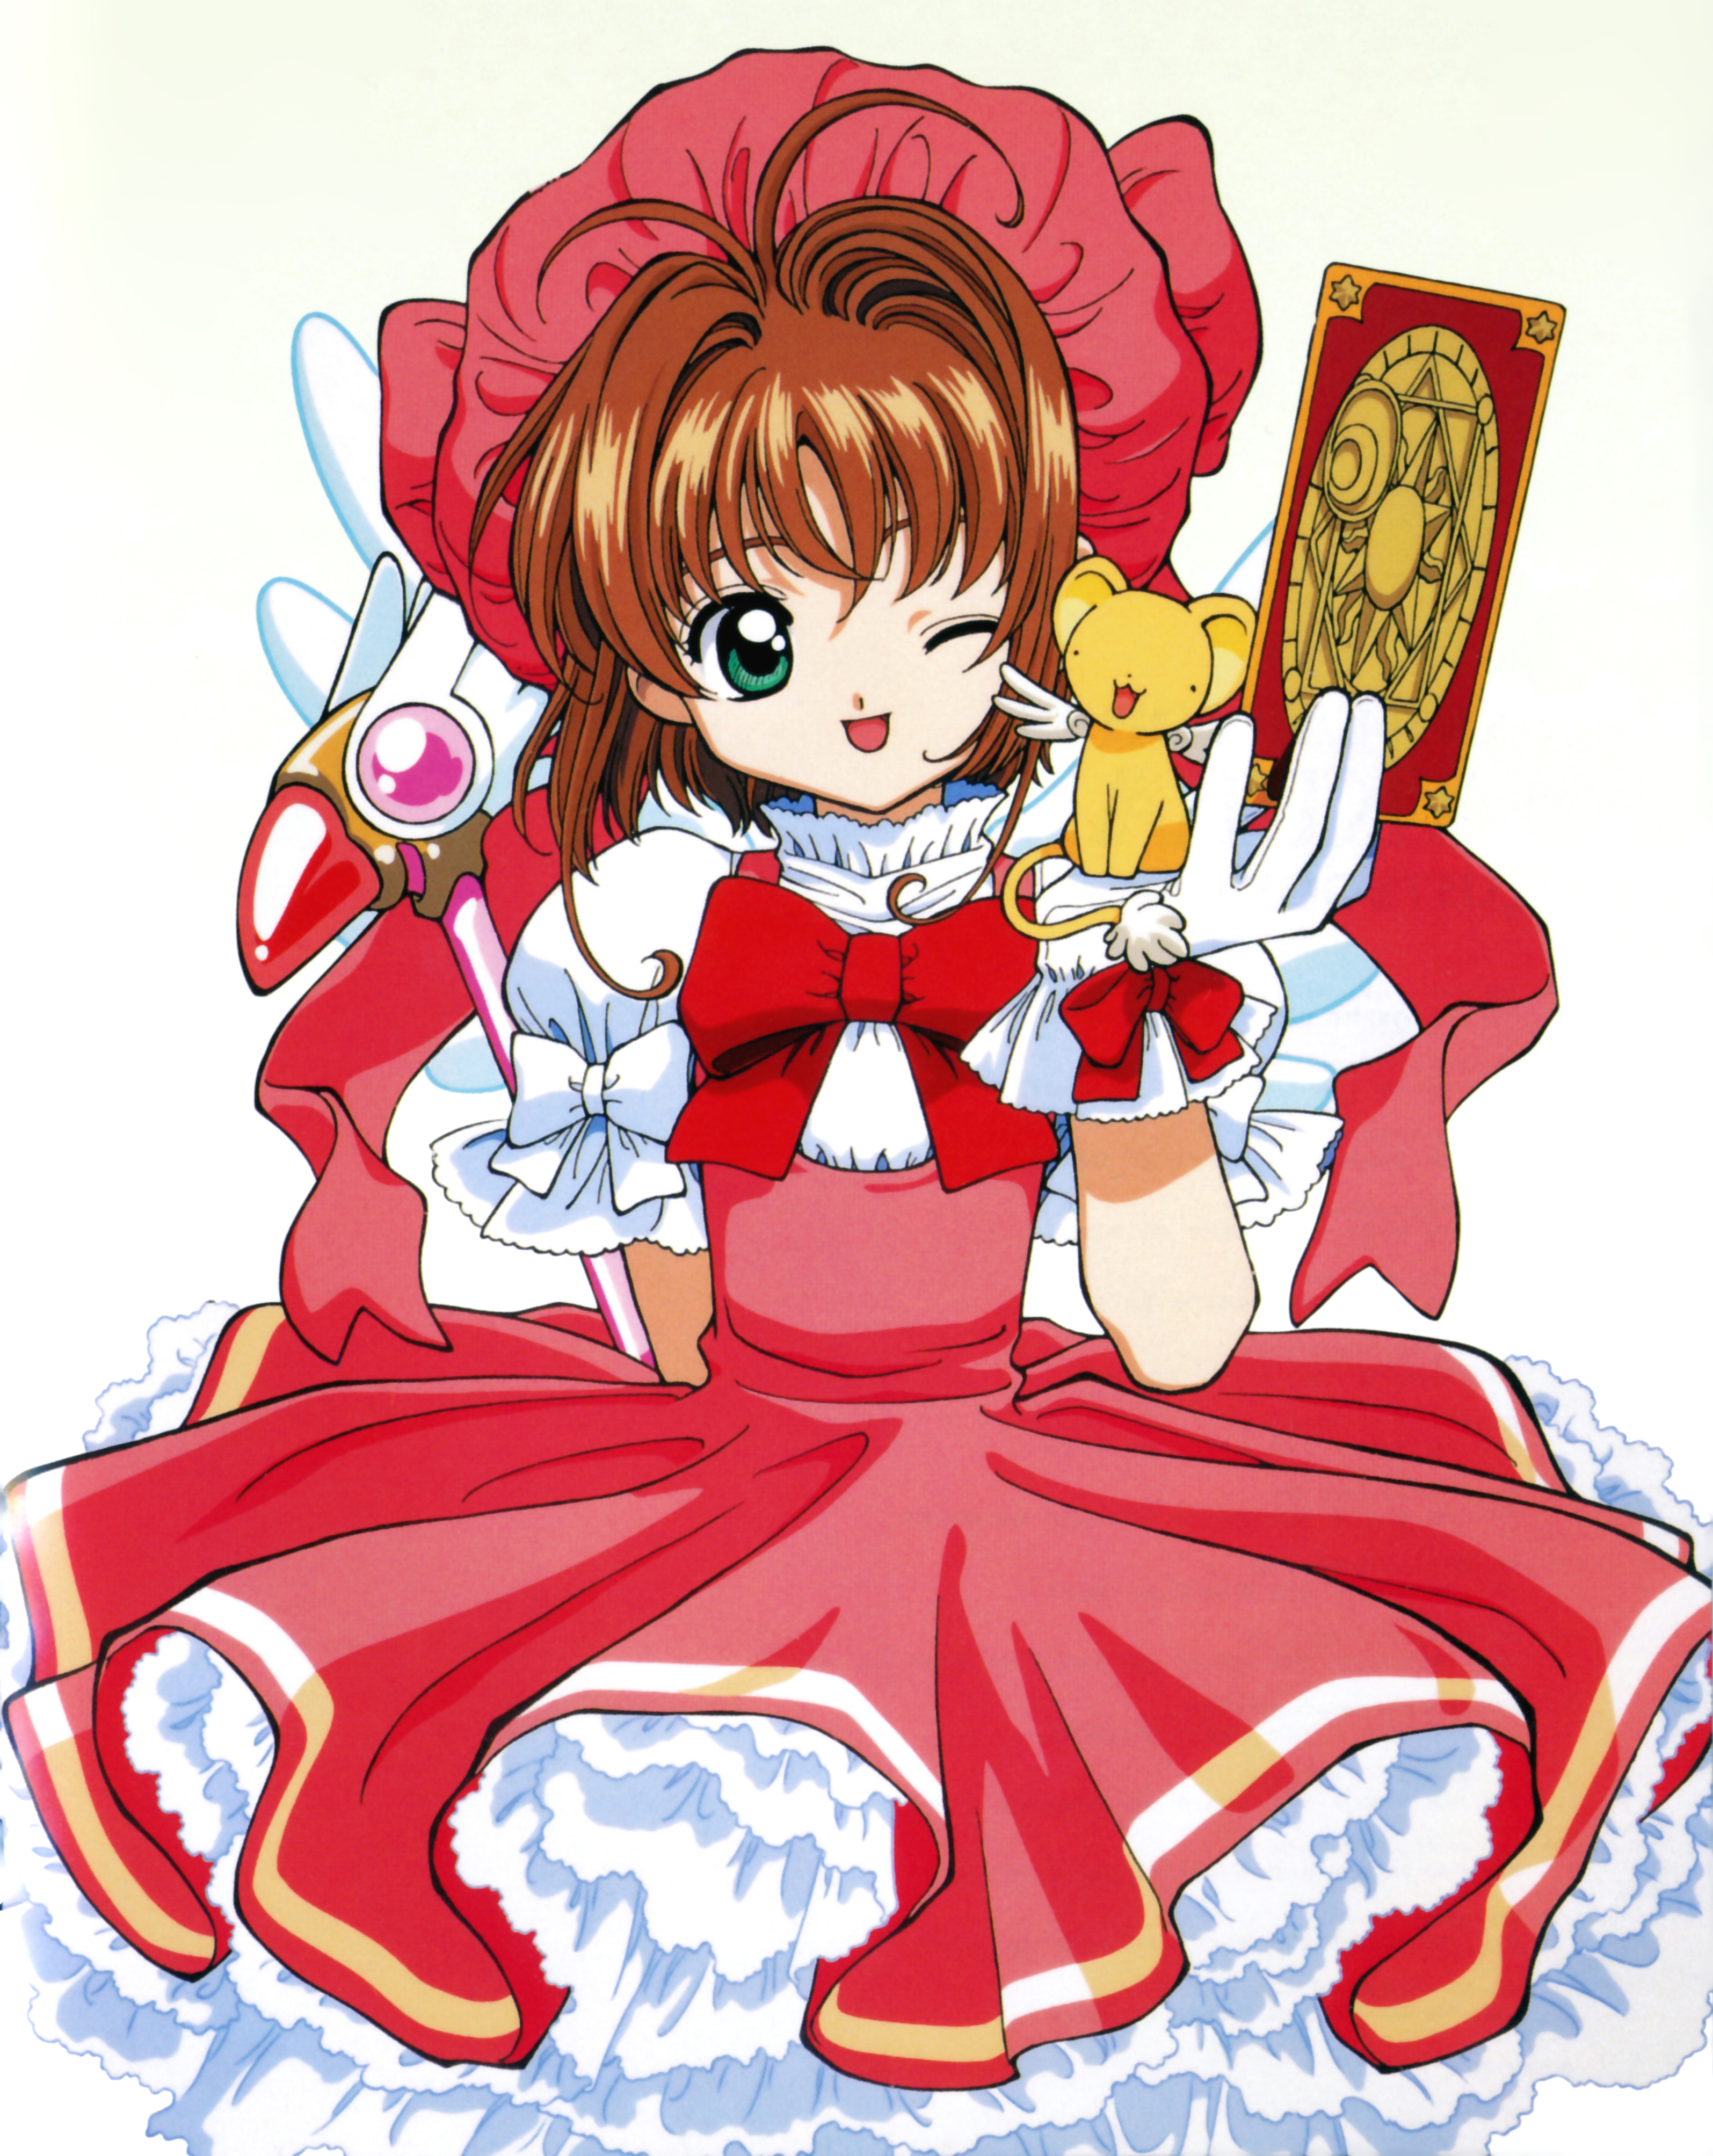 Cardcaptor Sakura: How to watch all the shows and movies in order | Popverse